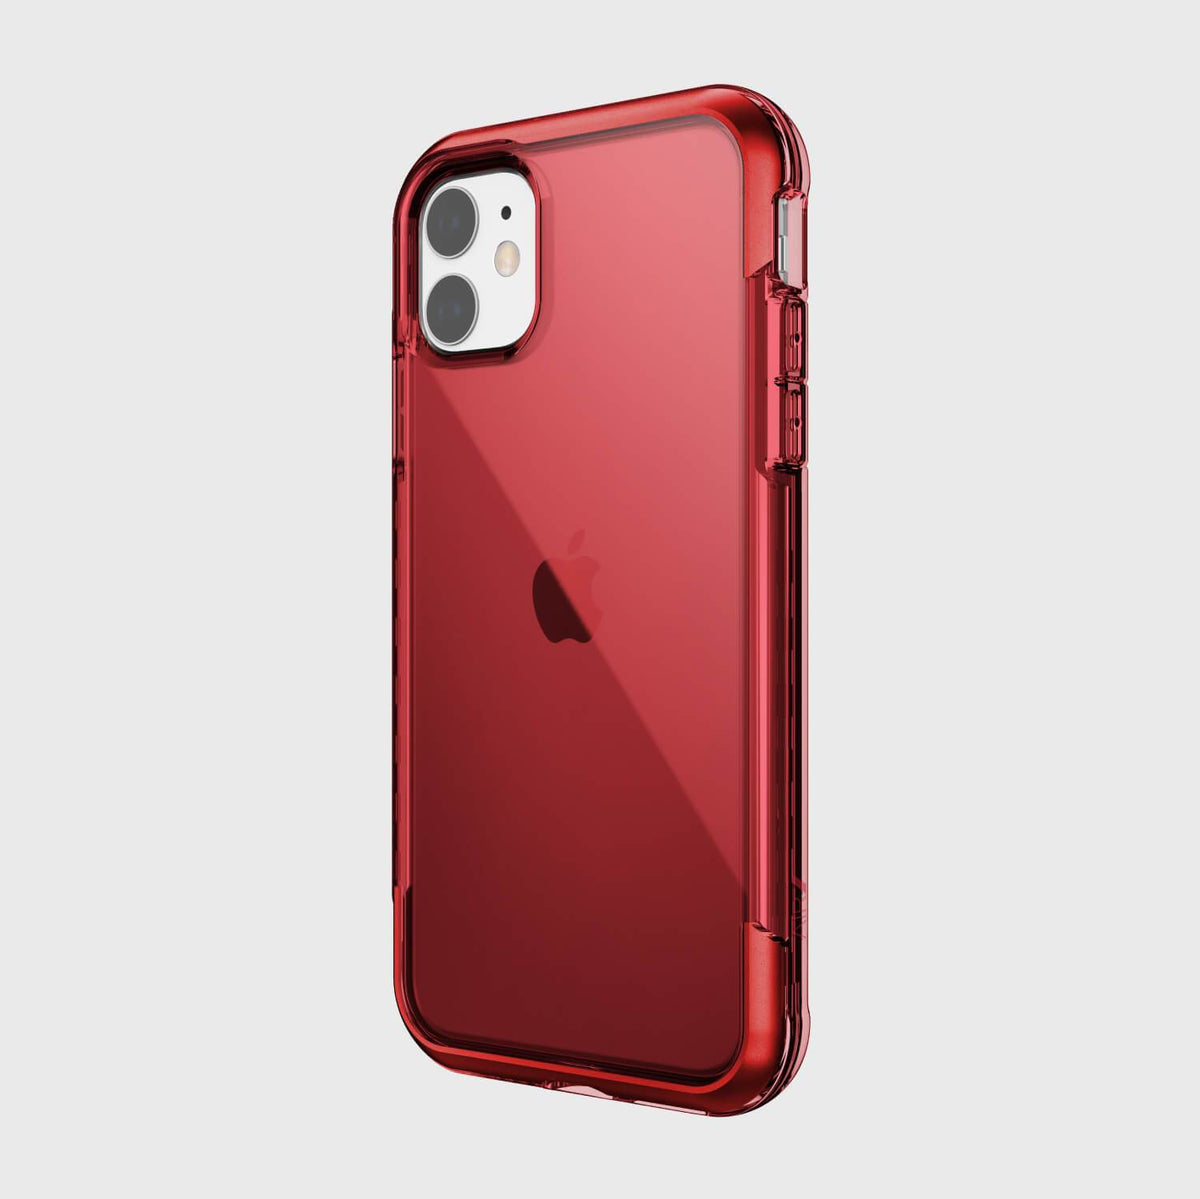 A Raptic AIR red iPhone 11 Pro case on a white background.